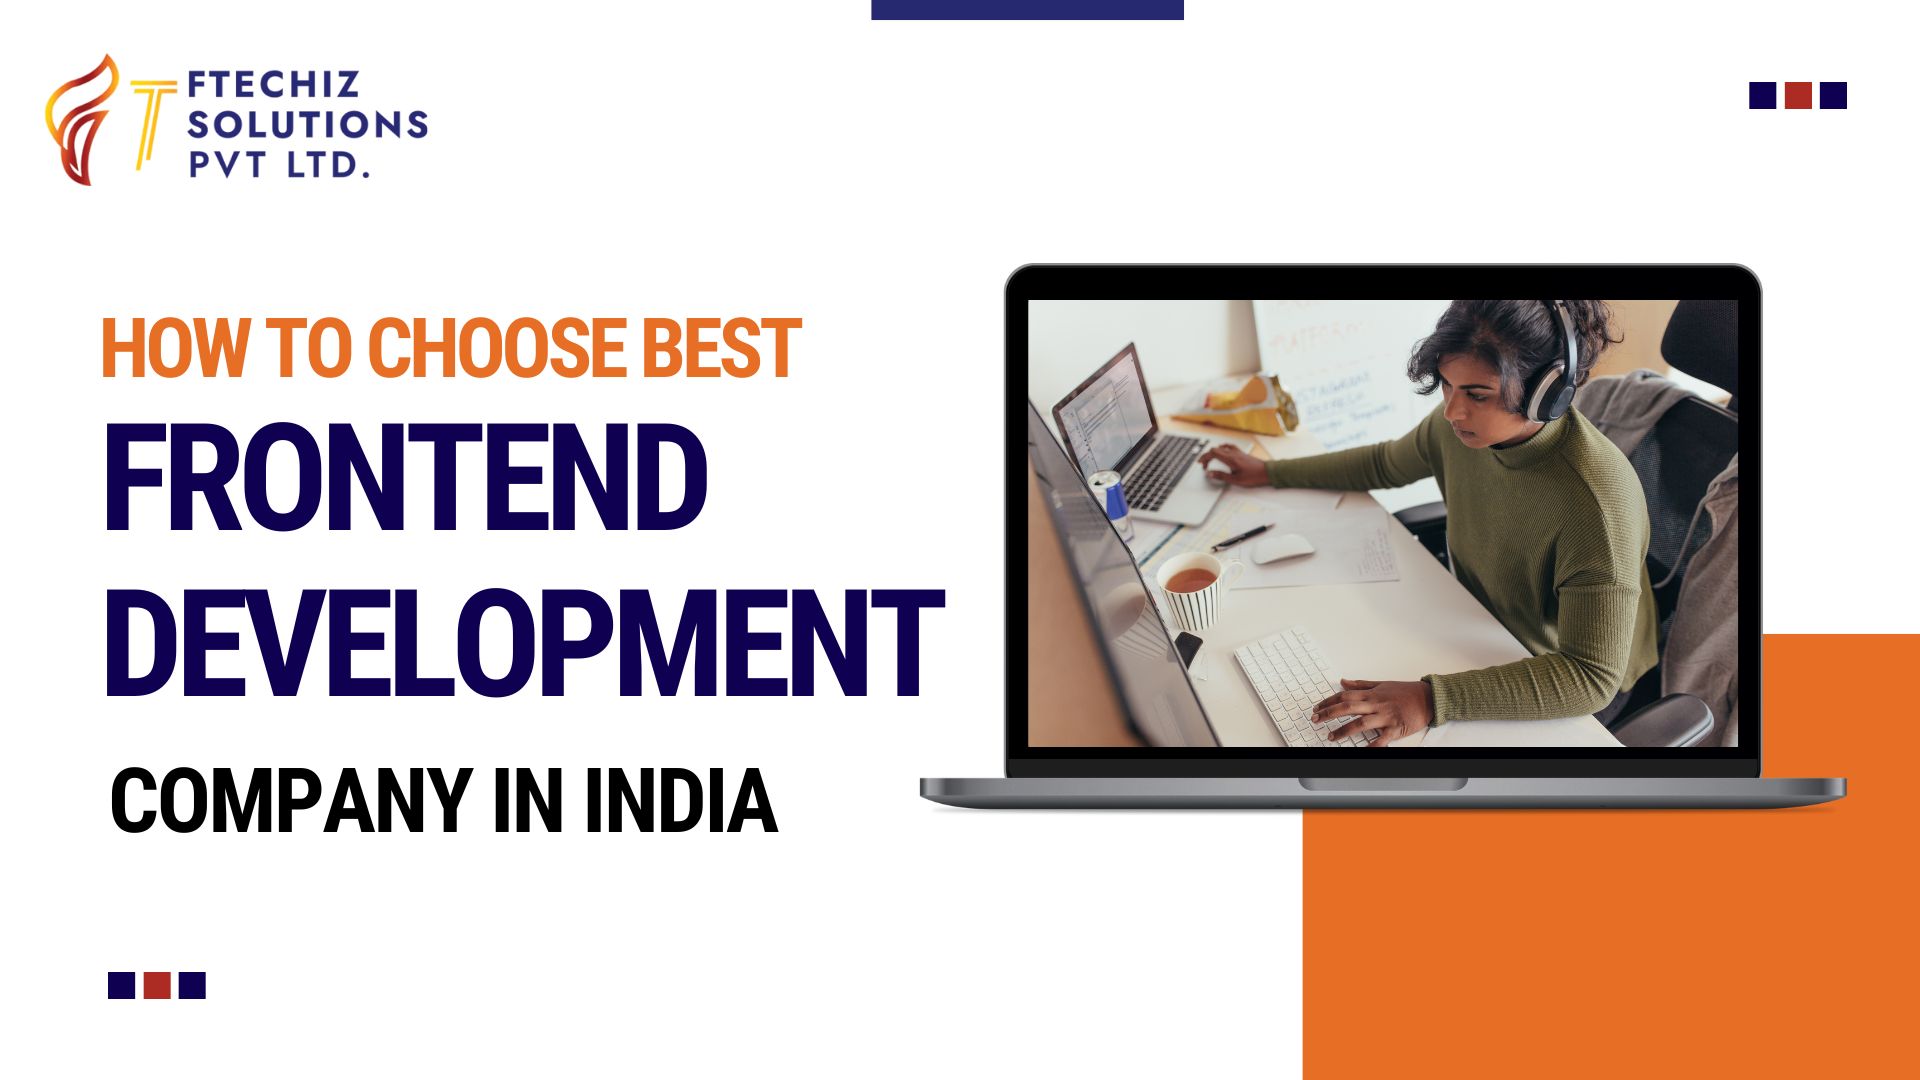 How to choose best frontend development company in India